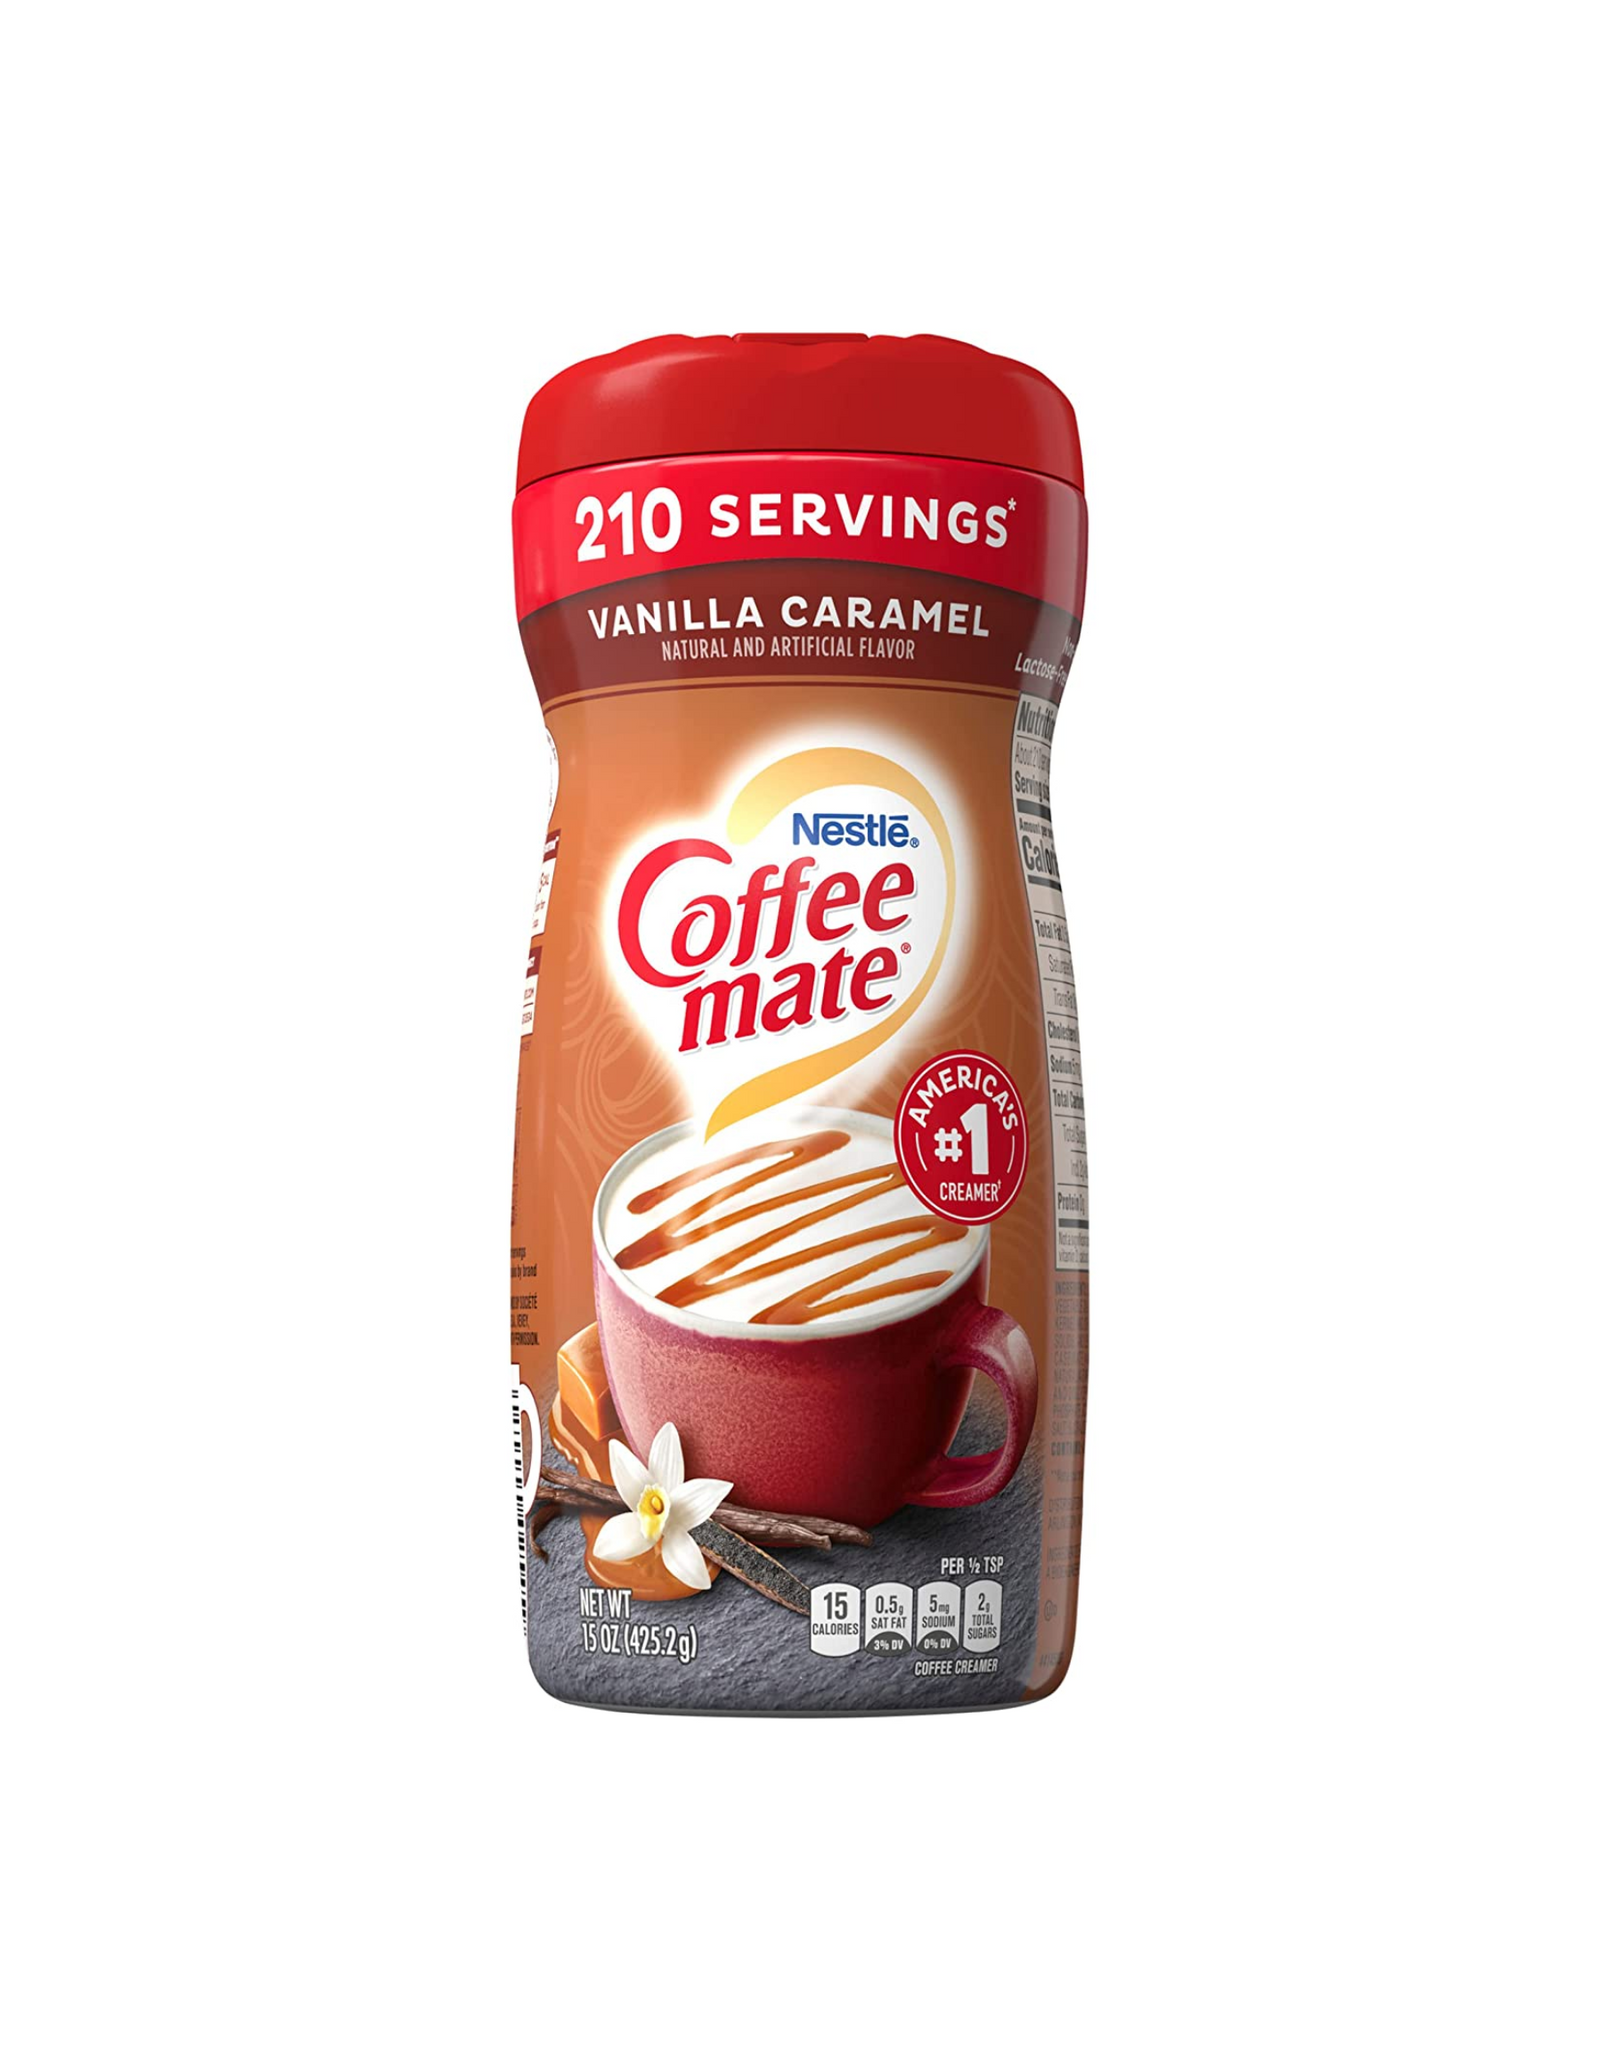 Coffee-mate Vanilla Caramel Powder Coffee Creamer, Natural and Artificial Flavor, 15 oz (Pack of 6)